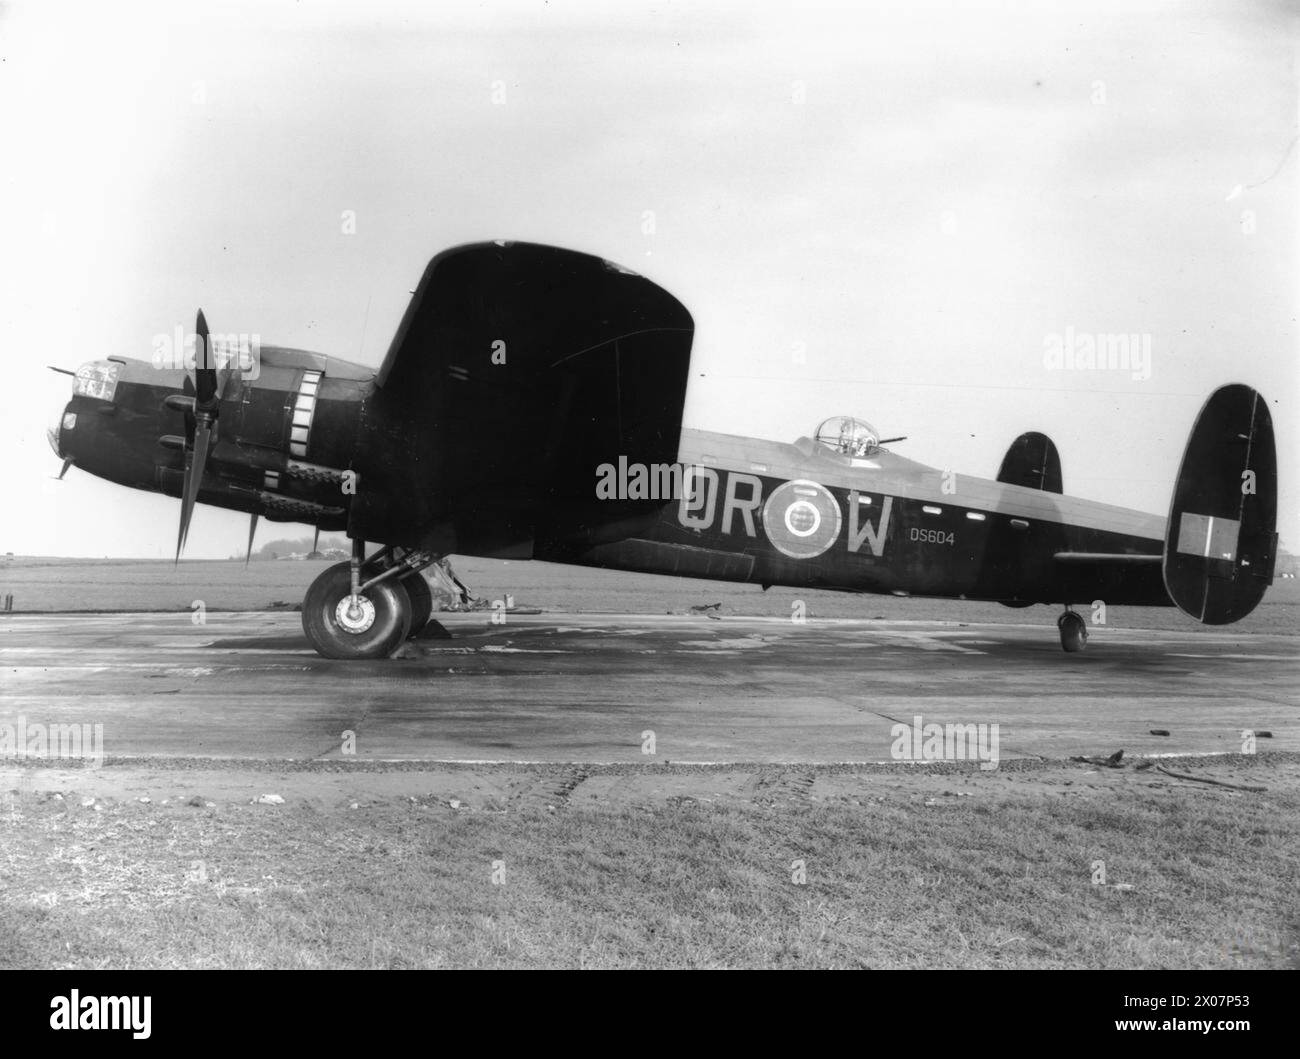 AIRCRAFT OF THE ROYAL AIR FORCE 1939-1945: AVRO 683 LANCASTER - Lancaster Mark II, DS604 QR-W, of No. 61 Squadron RAF, on the ground at Syerston, Nottinghamshire. DS604 later joined No. 115 Squadron RAF and was lost over Frankfurt on 10/11 April 1943 , Royal Air Force, Royal Air Force Regiment, Sqdn, 61, British Army, Royal Flying Corps, Reserve Sqdn, 7 Stock Photo